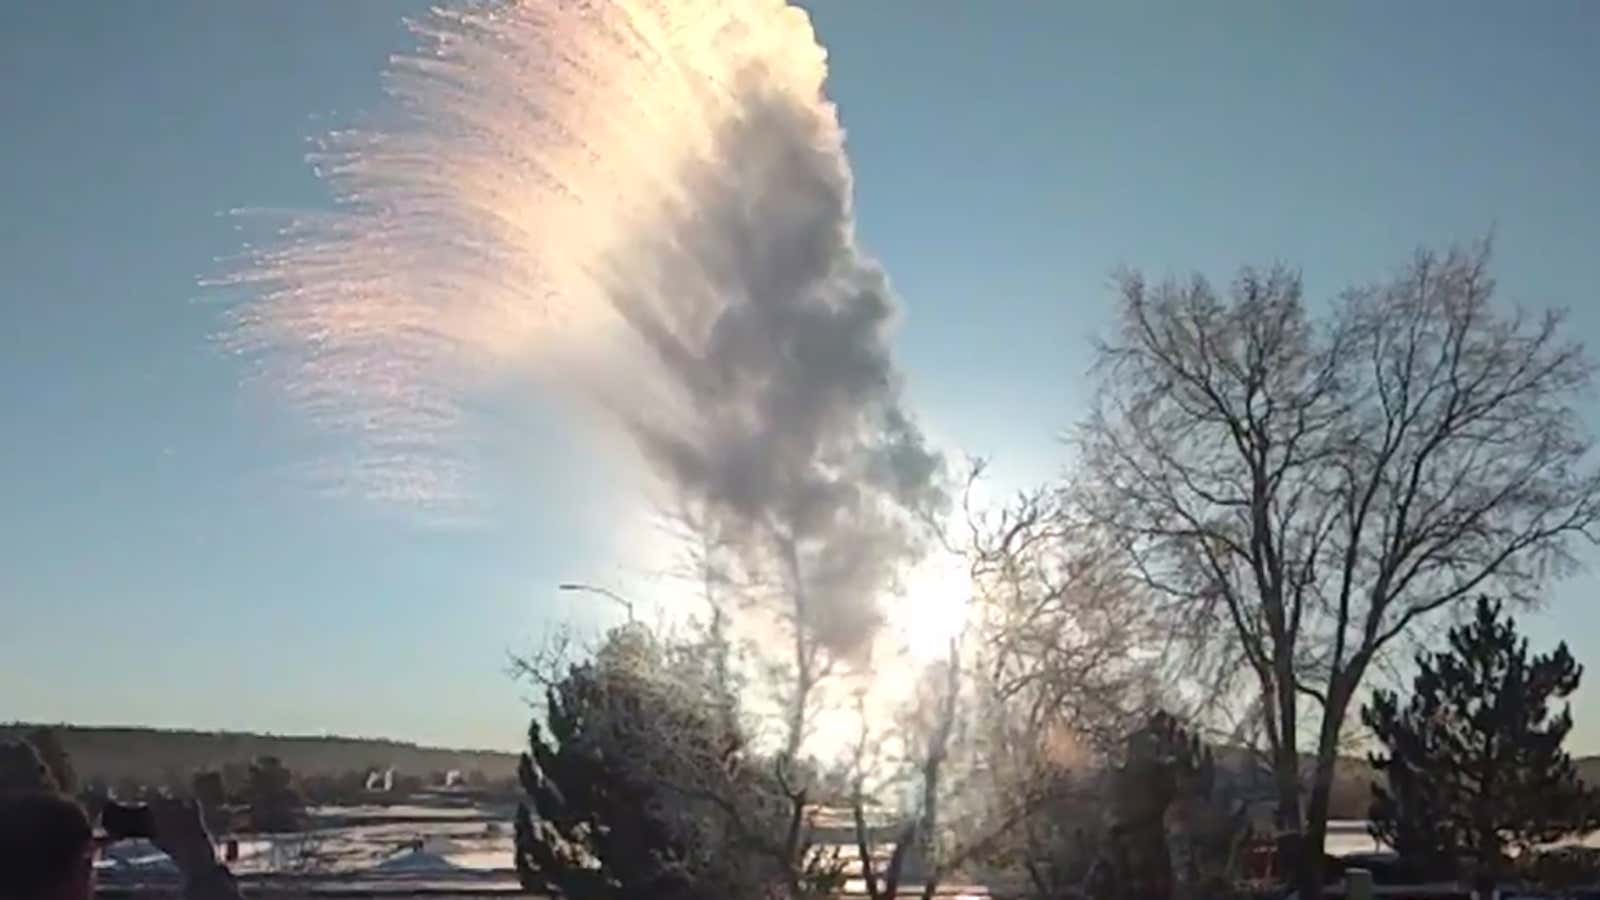 It’s so cold in Arizona, boiling water is instantly turning into clouds